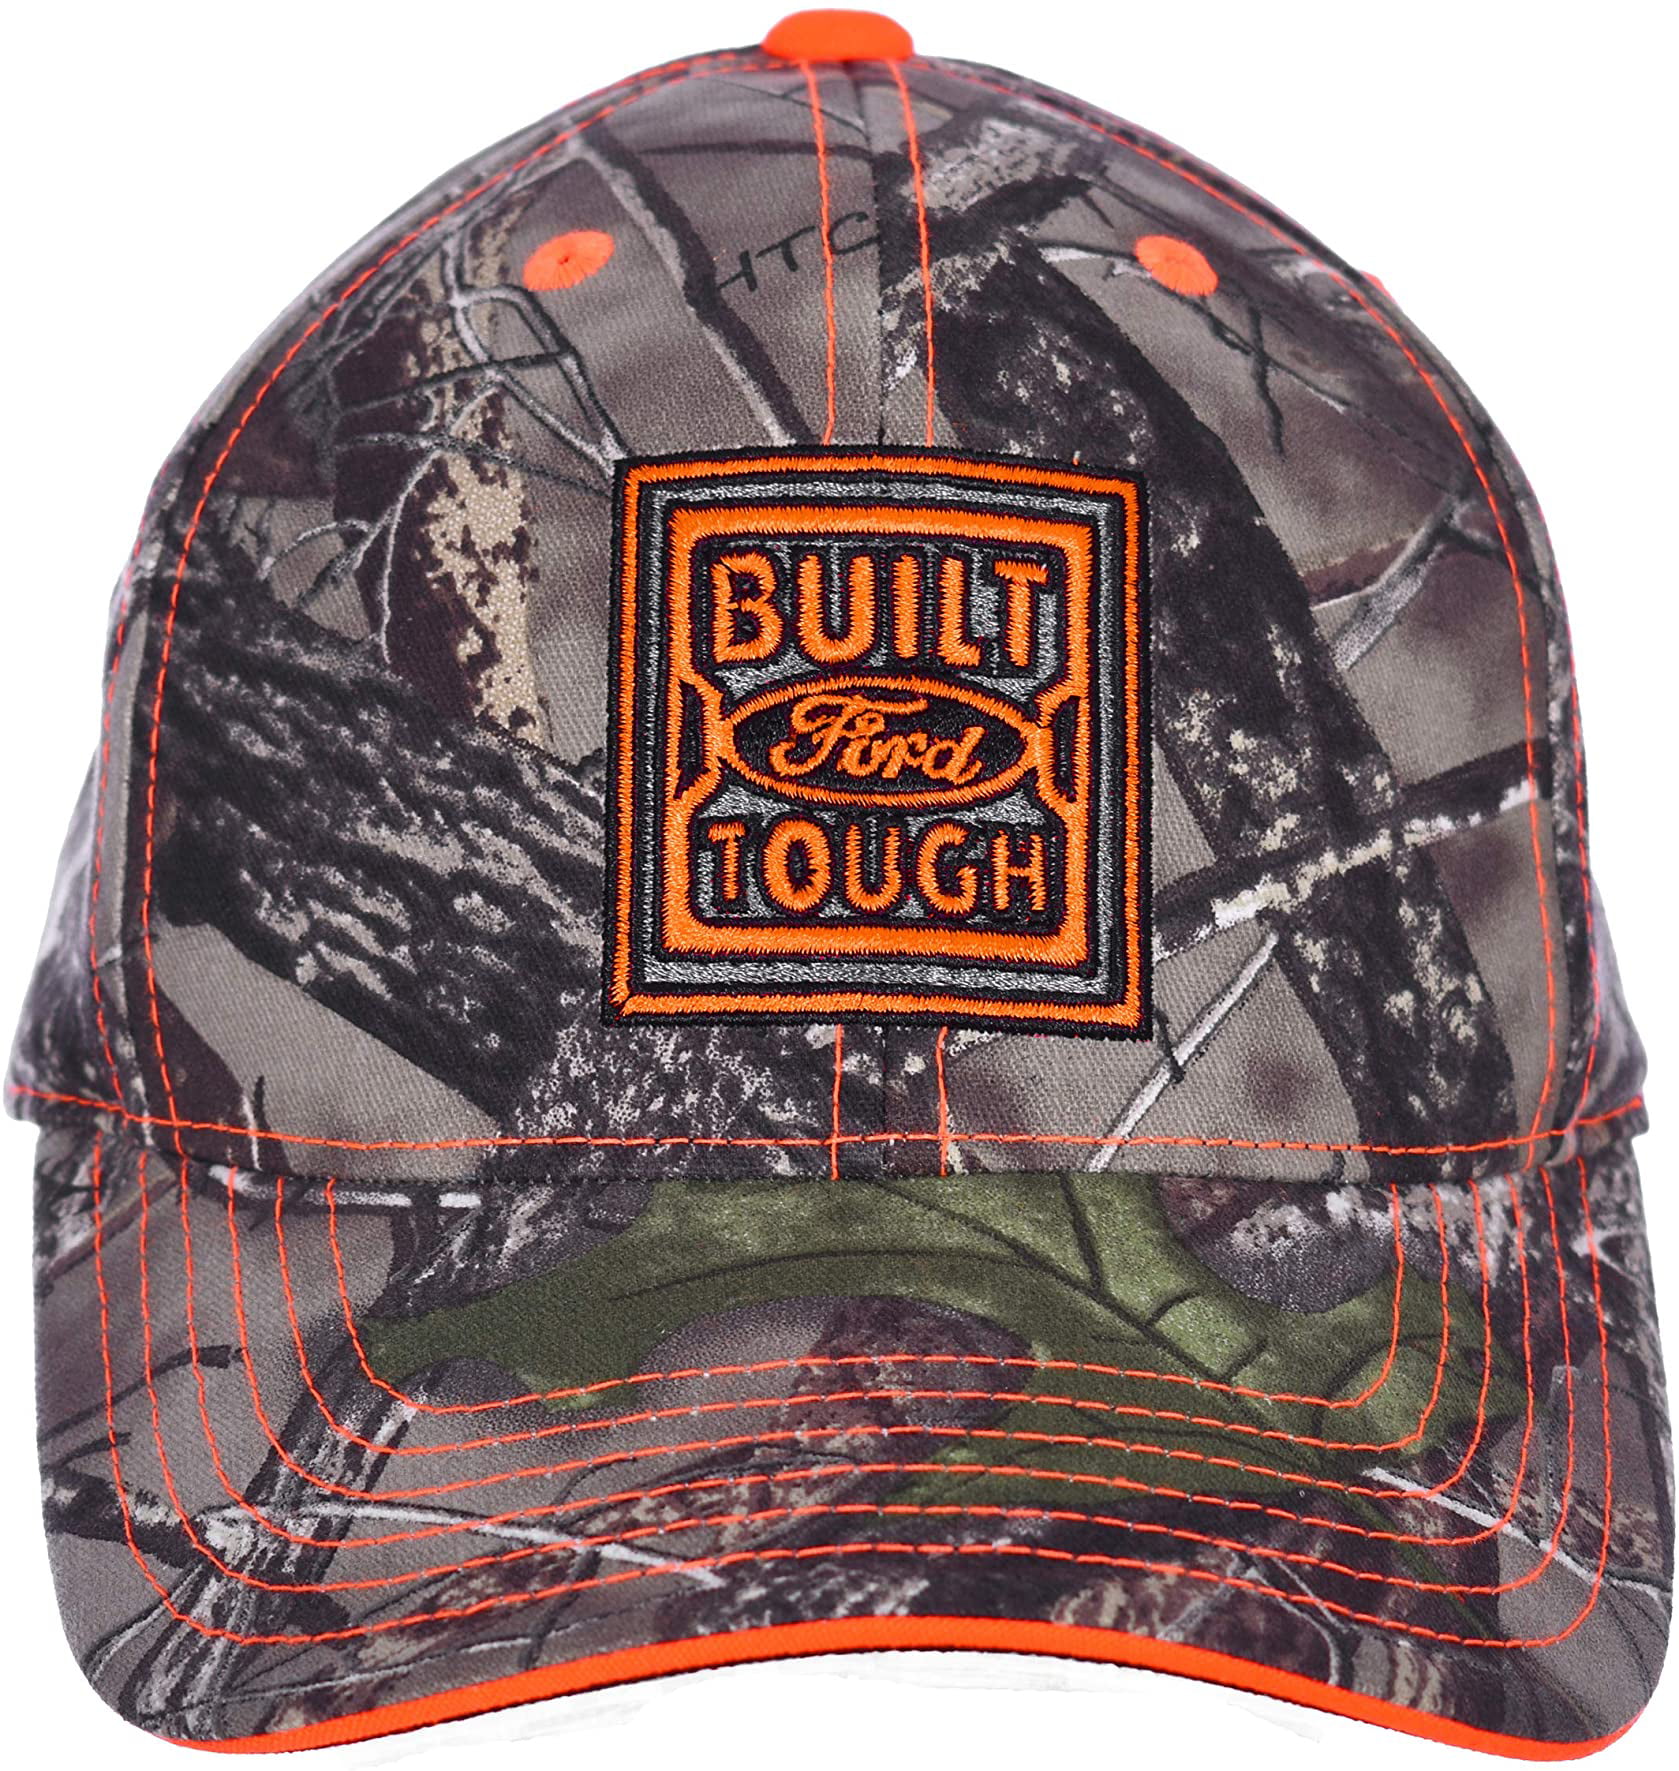 Real Tree Ford Built Ford Tough Baseball Cap With Blaze Orange Accents Camo Hat 